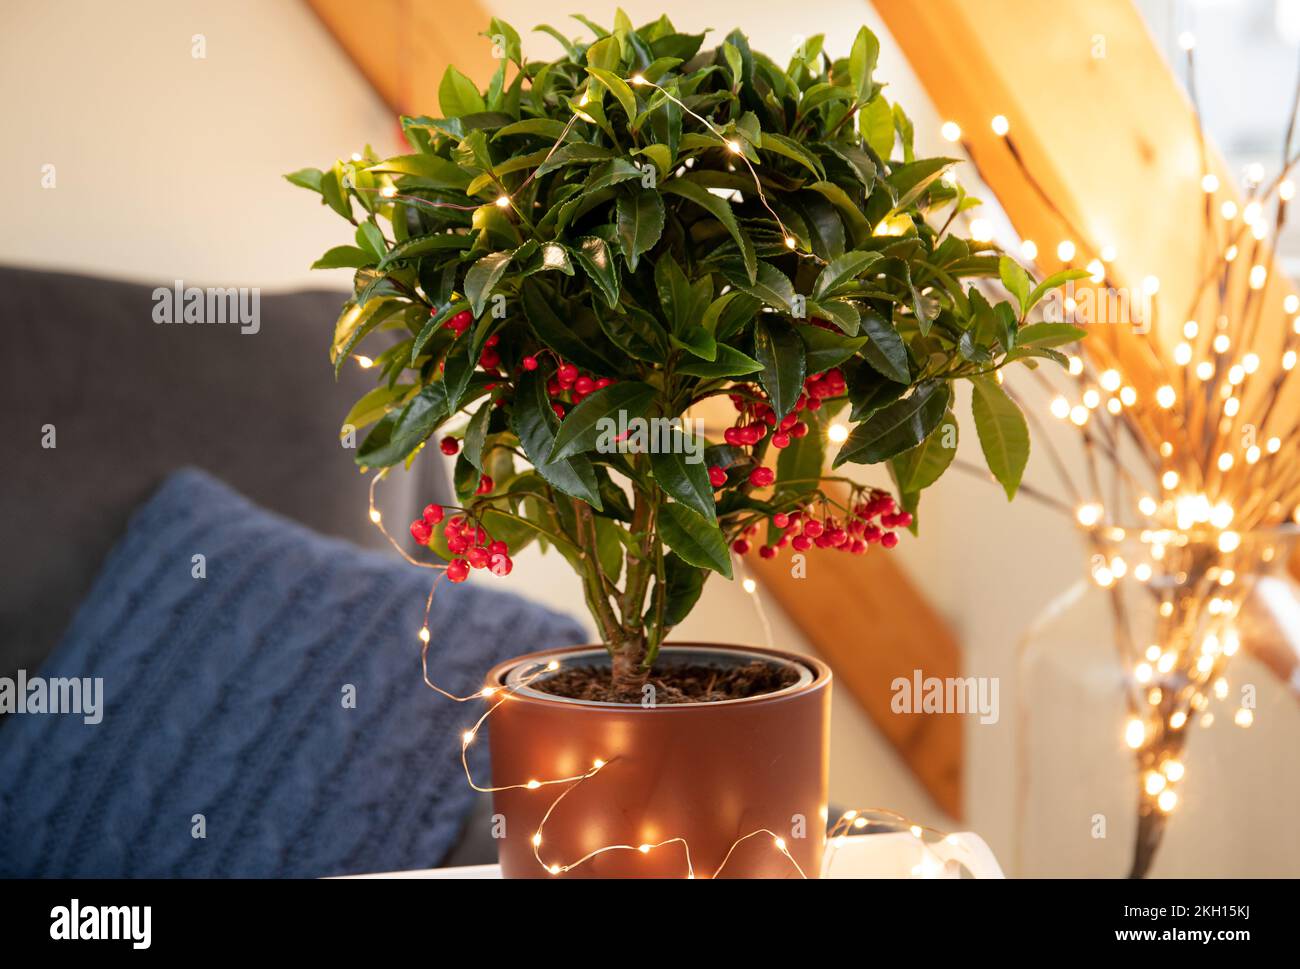 Ardisia crenata, Primulaceae is known by a variety of names as Christmas berry, Australian holly, coral ardisia, coral bush, coralberry, coralberry. Stock Photo